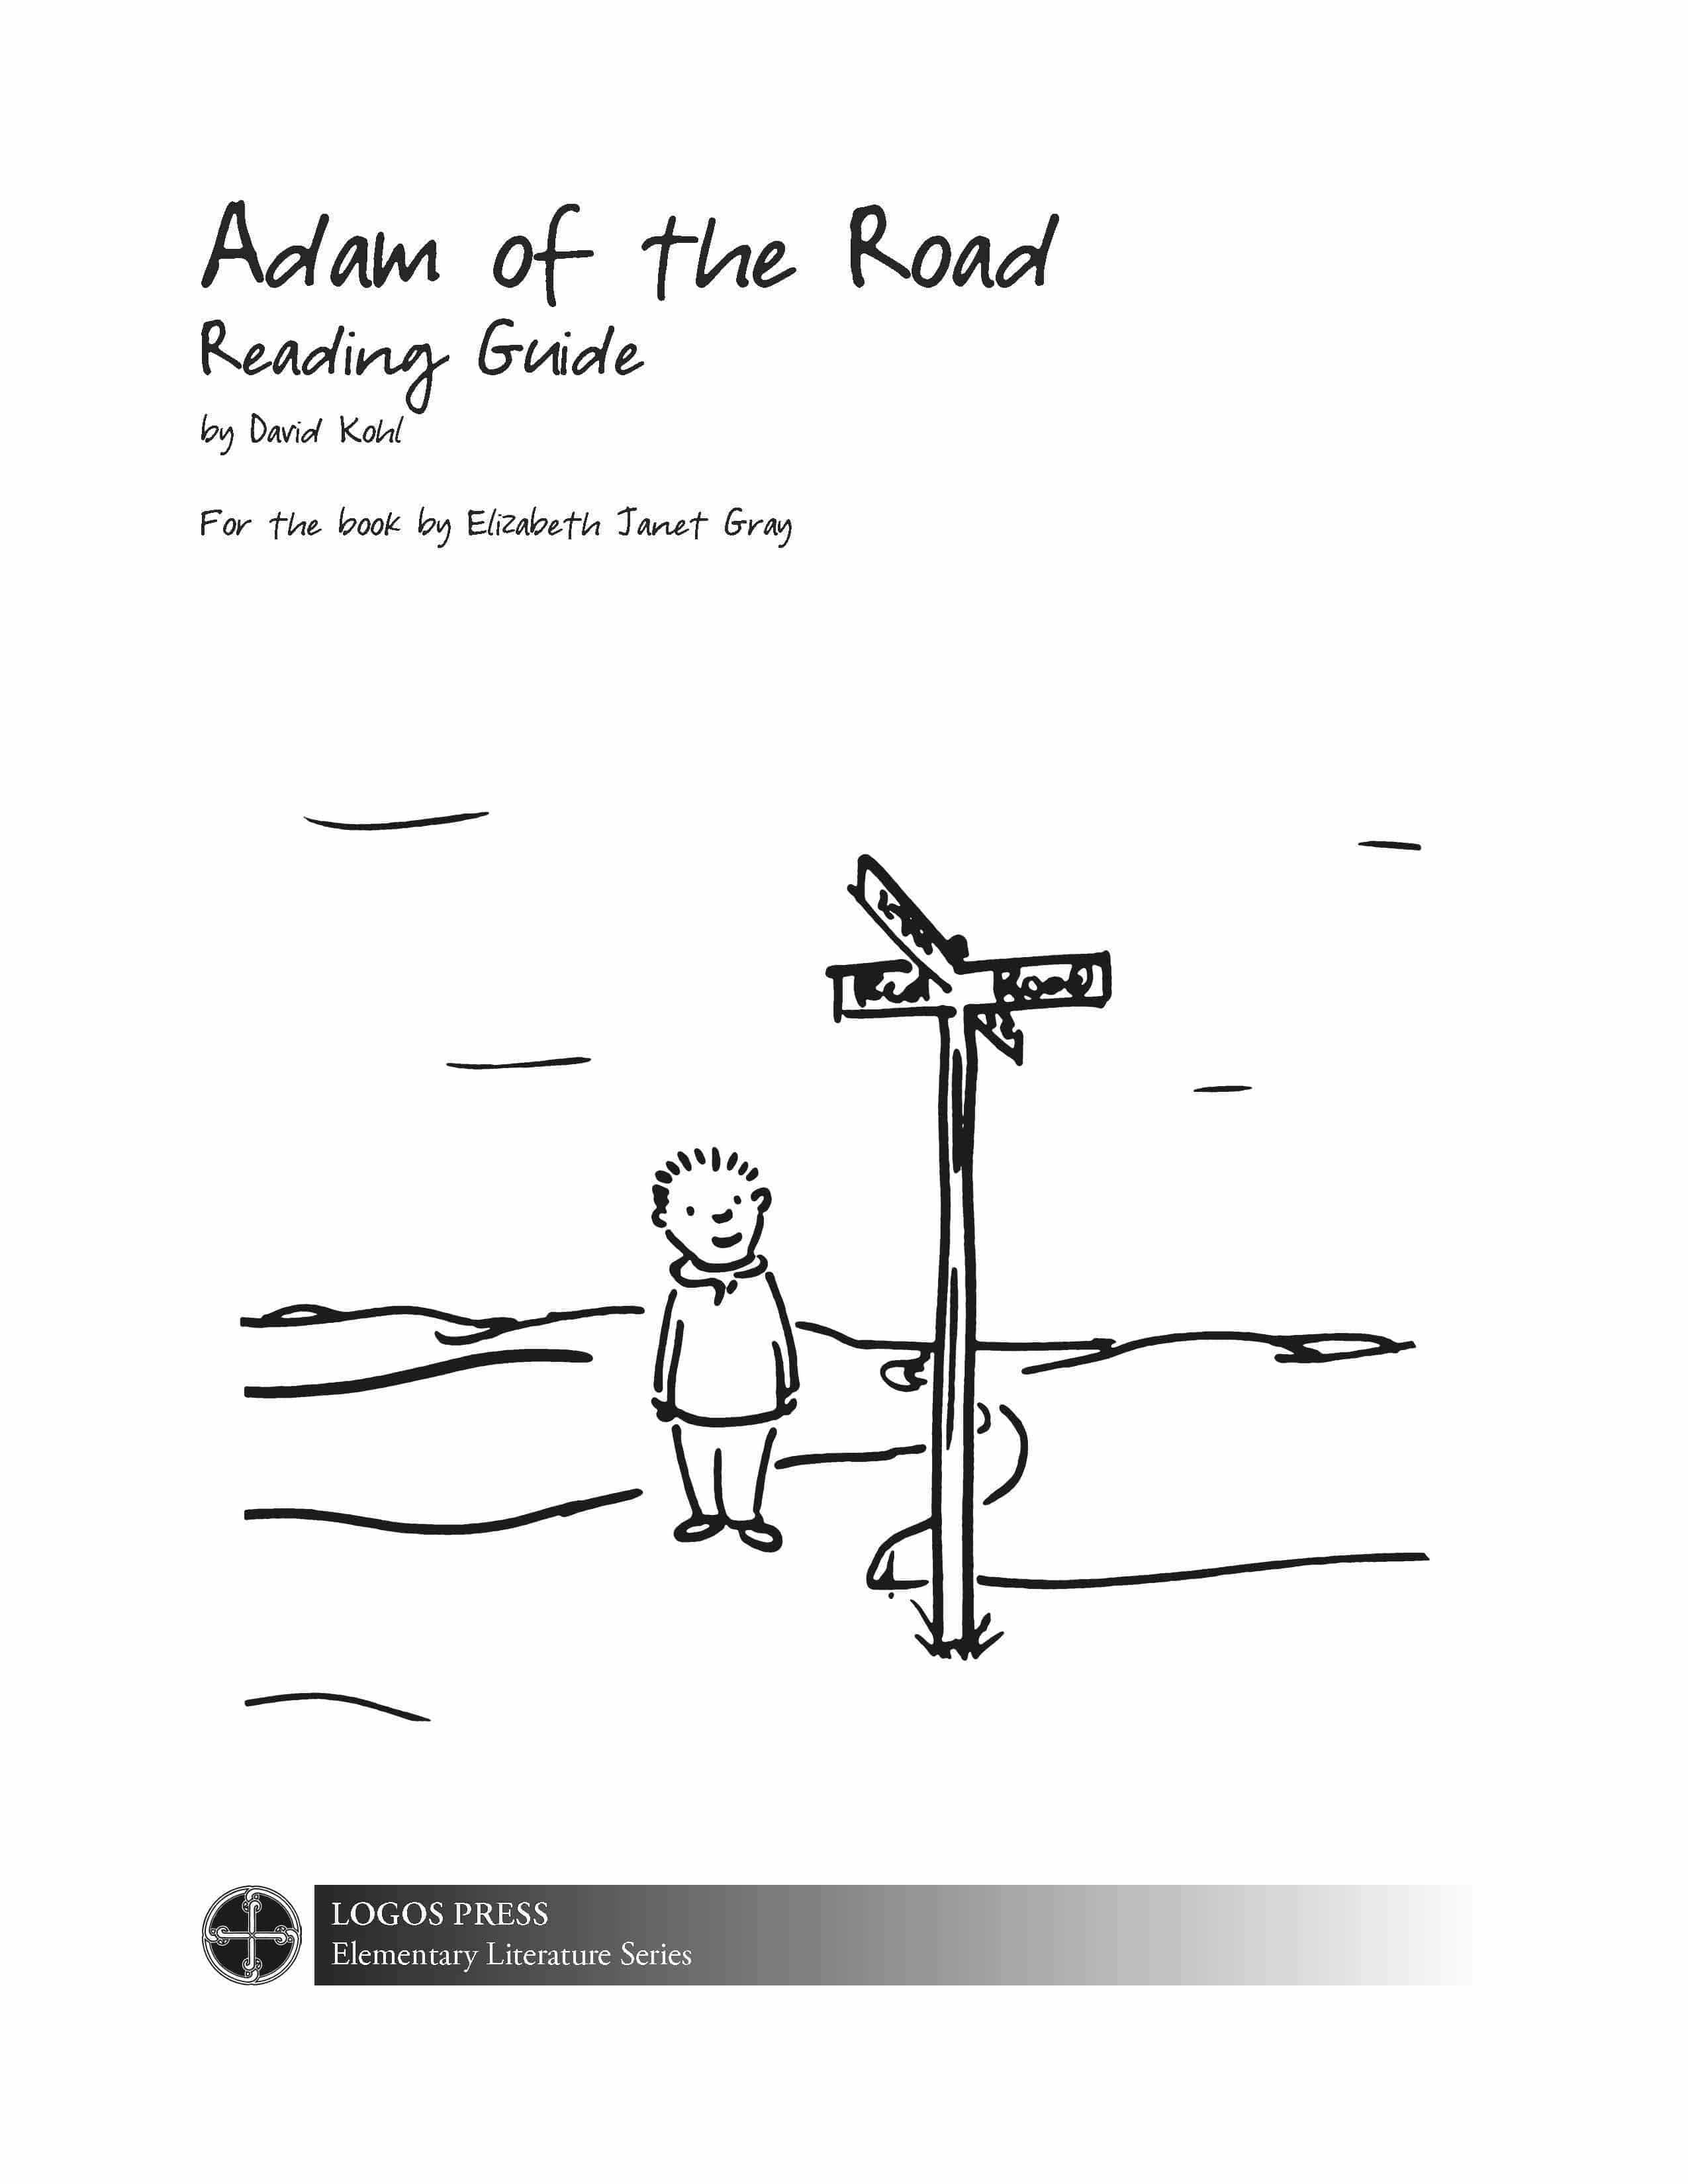 Adam of the Road - Reading Guide (Download)